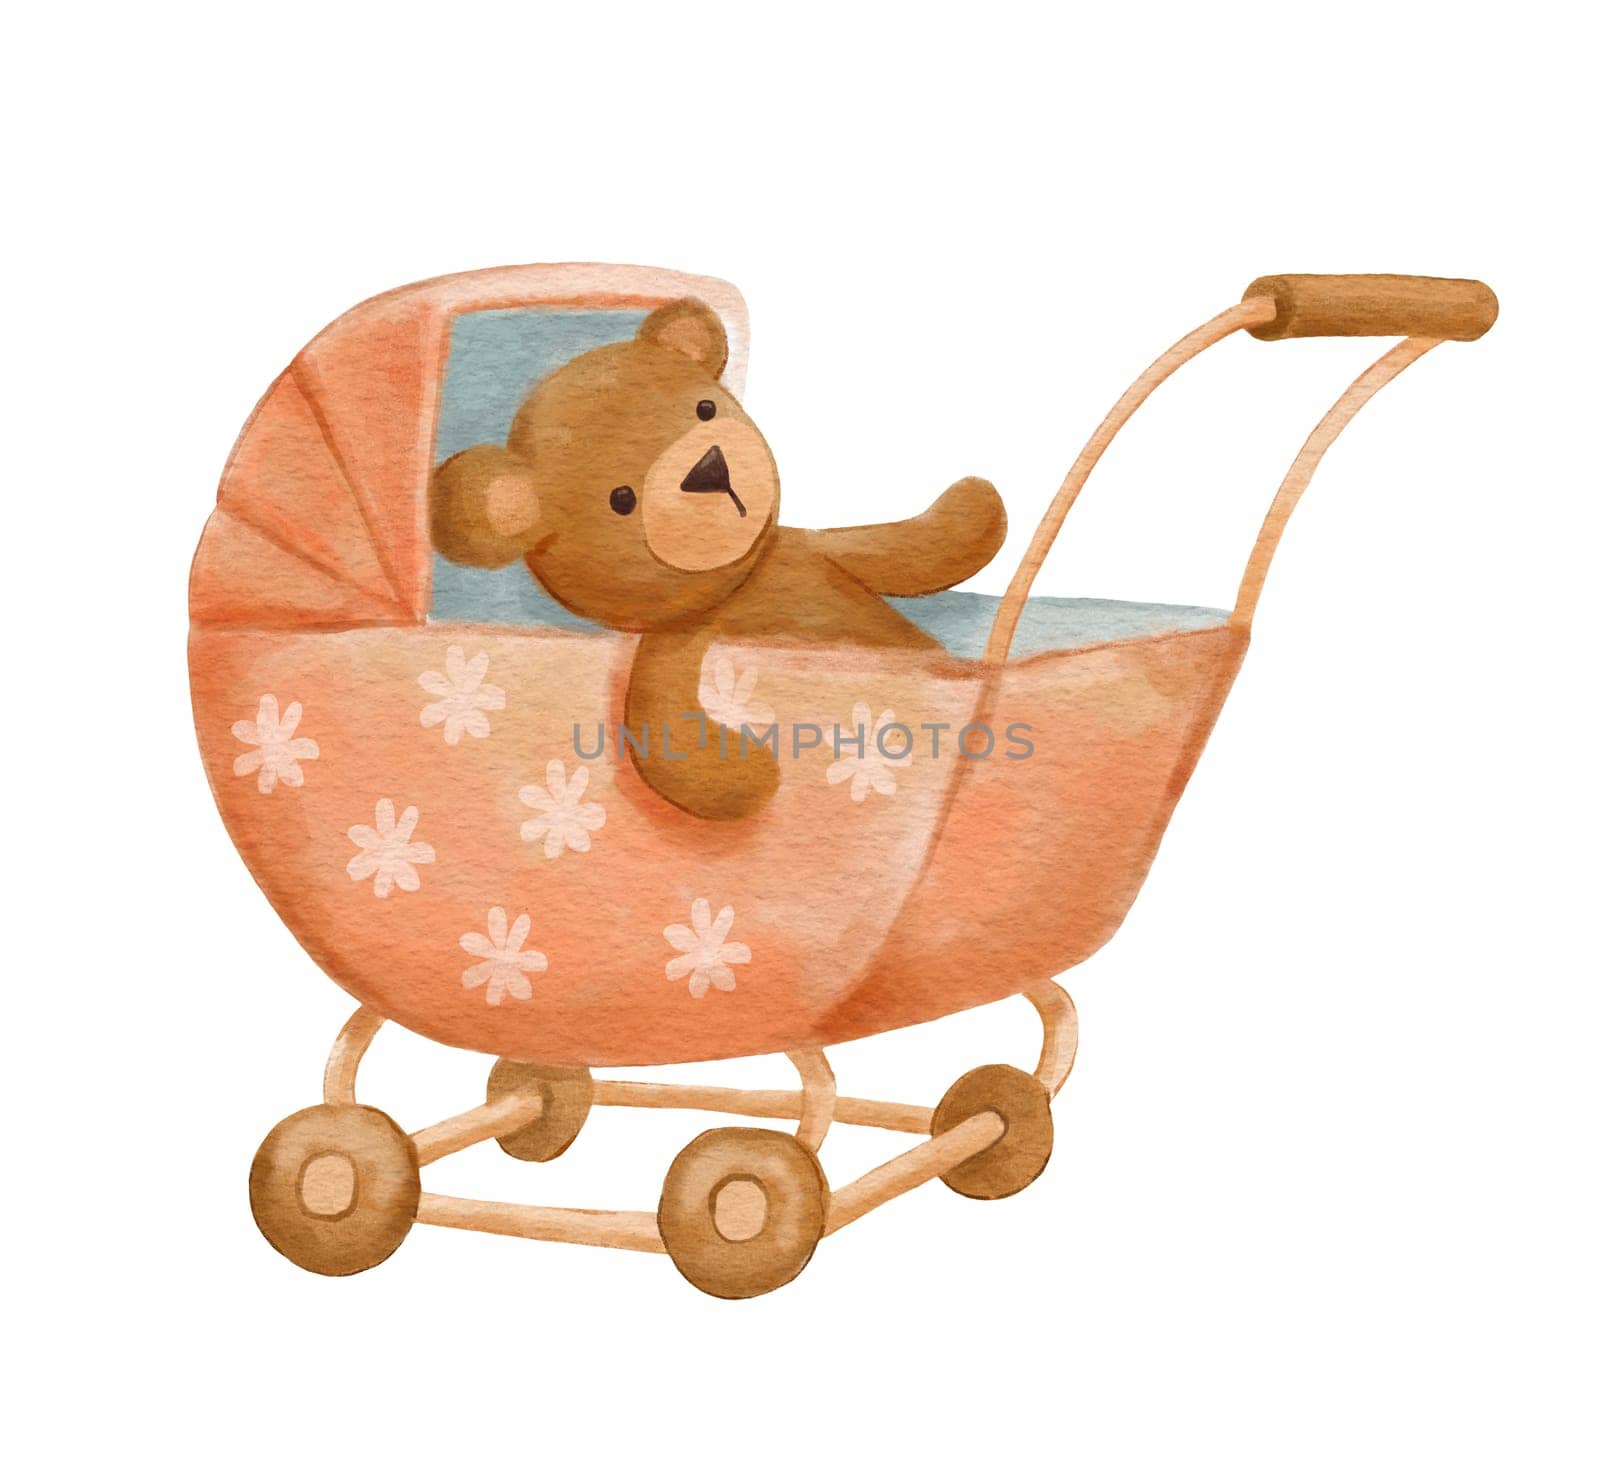 Toy baby stroller and teddy bear isolated on white. Watercolor hand drawn illustration by ElenaPlatova